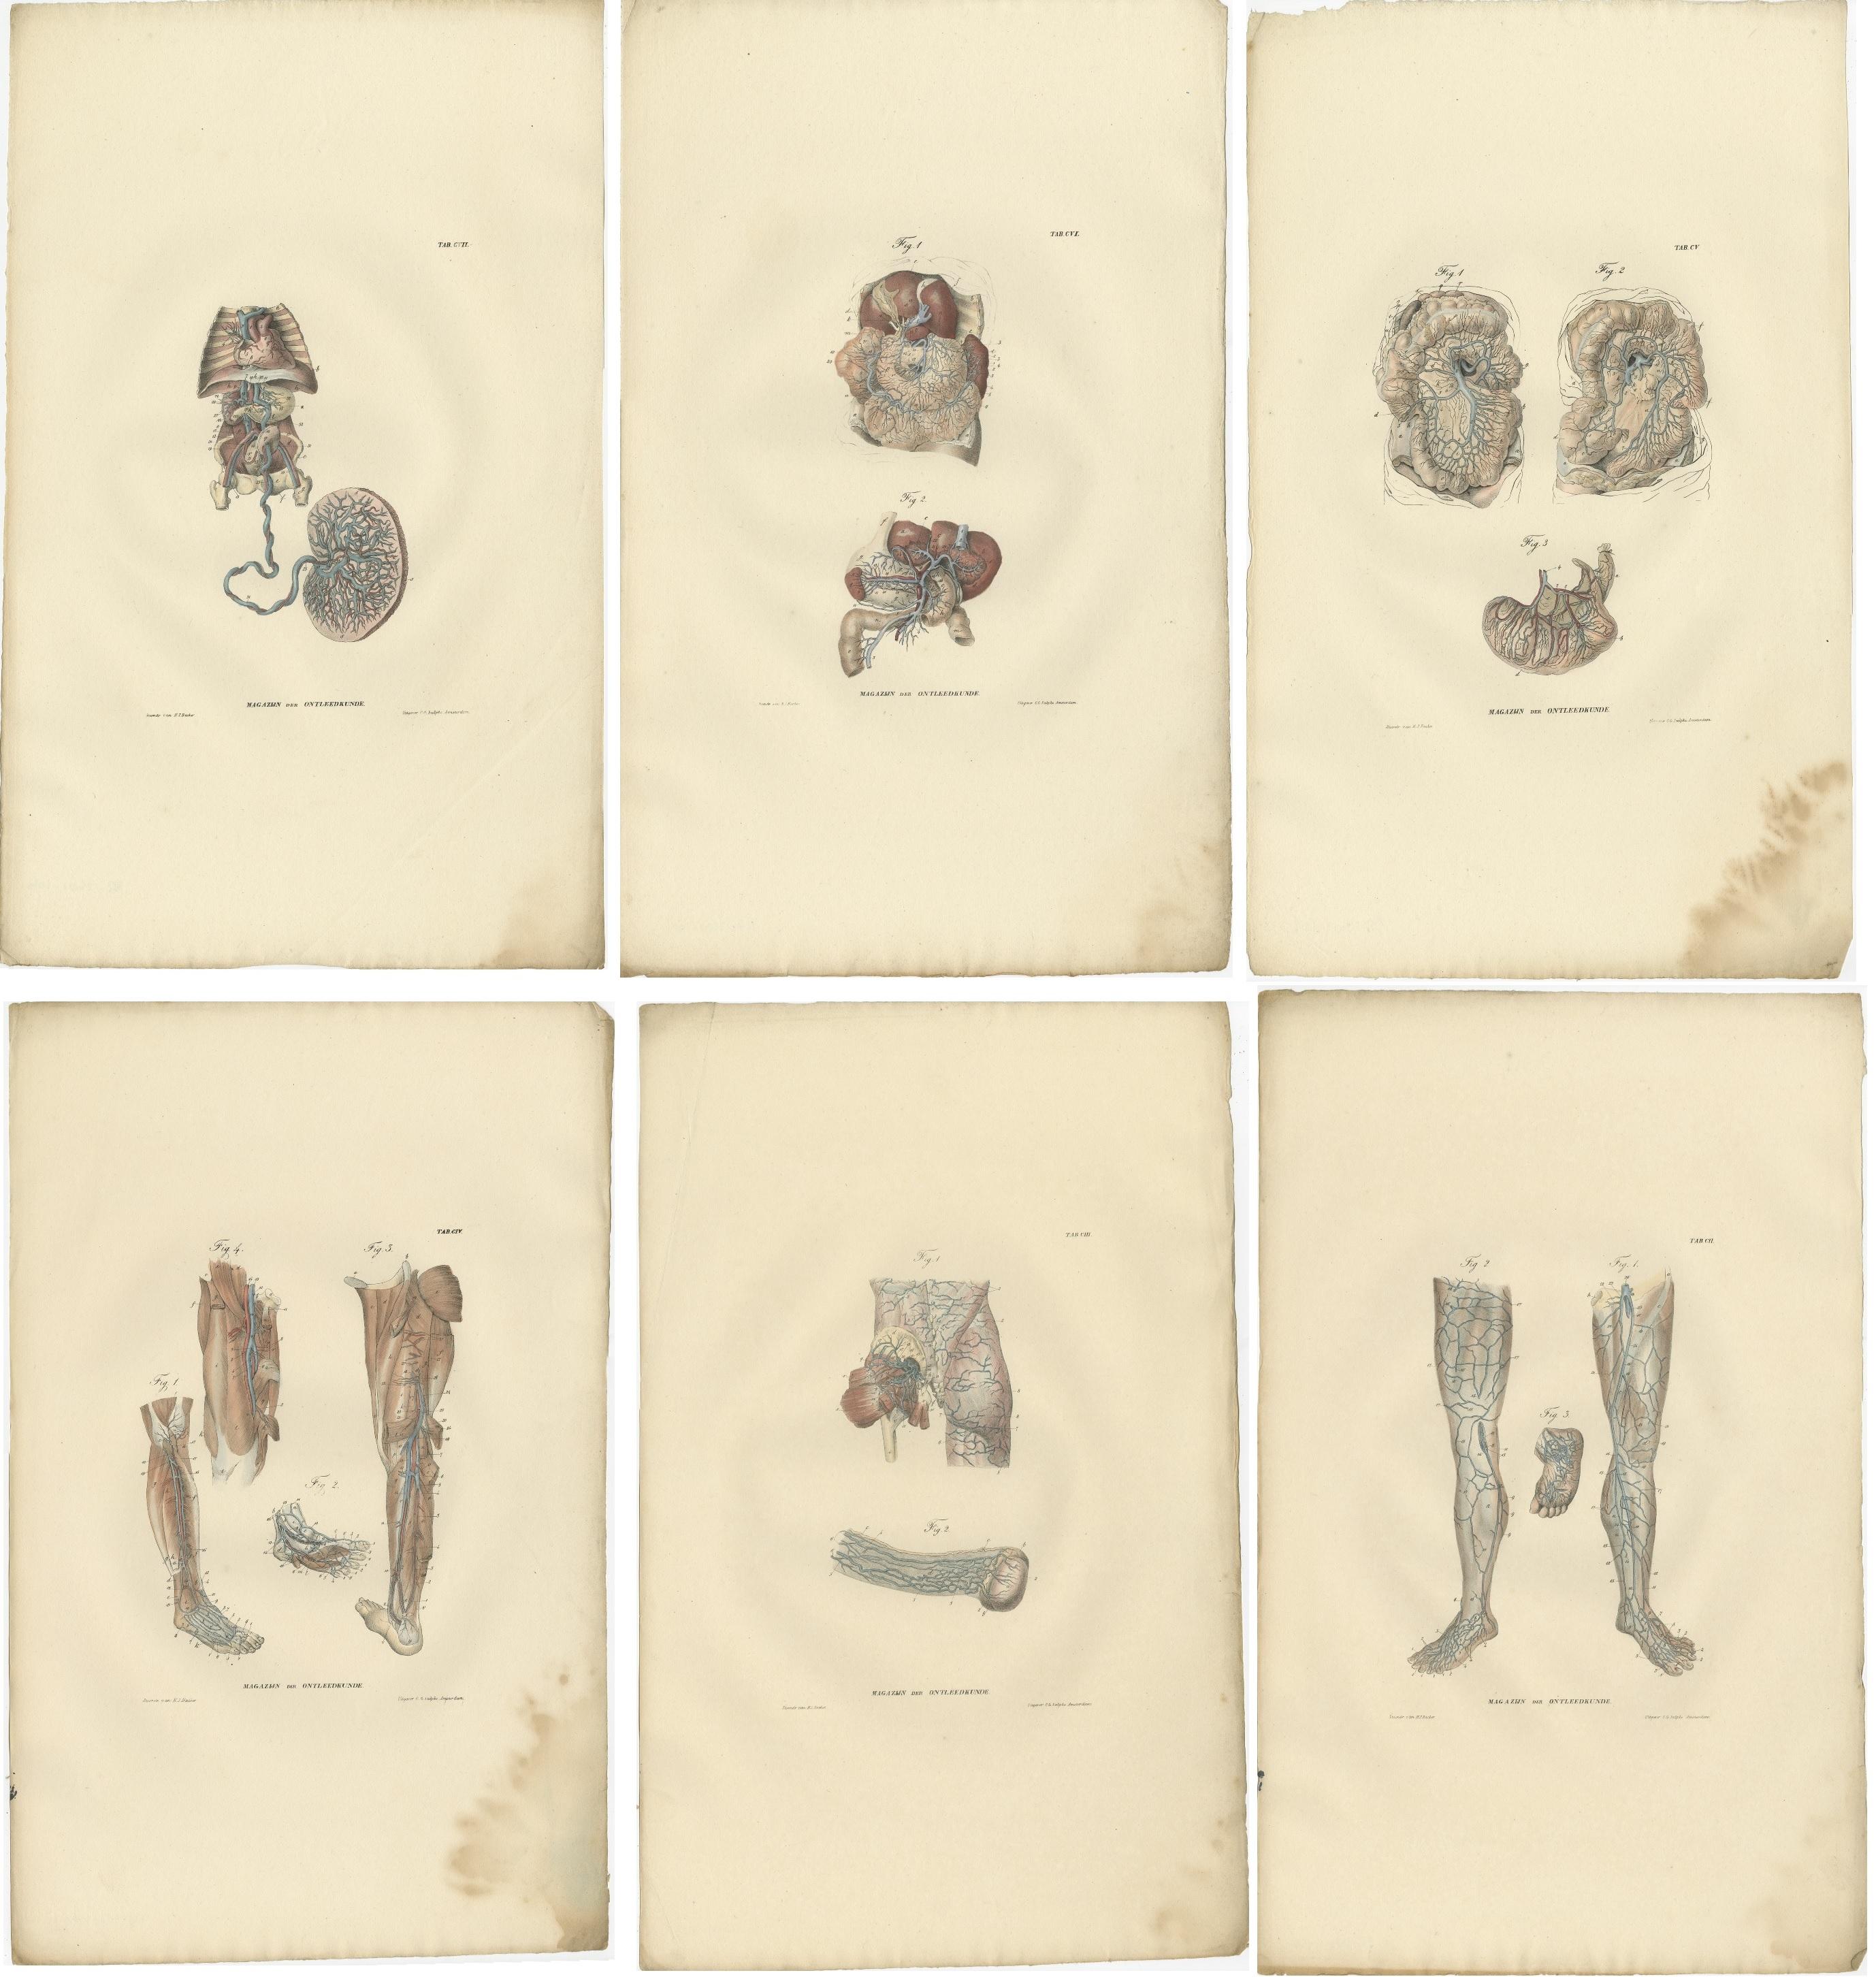 Set of 18 antique anatomy prints of blood vessels of the human body. These prints originate from 'Magazijn van ontleedkunde' by Dr. Th. Richter. Published 1839.